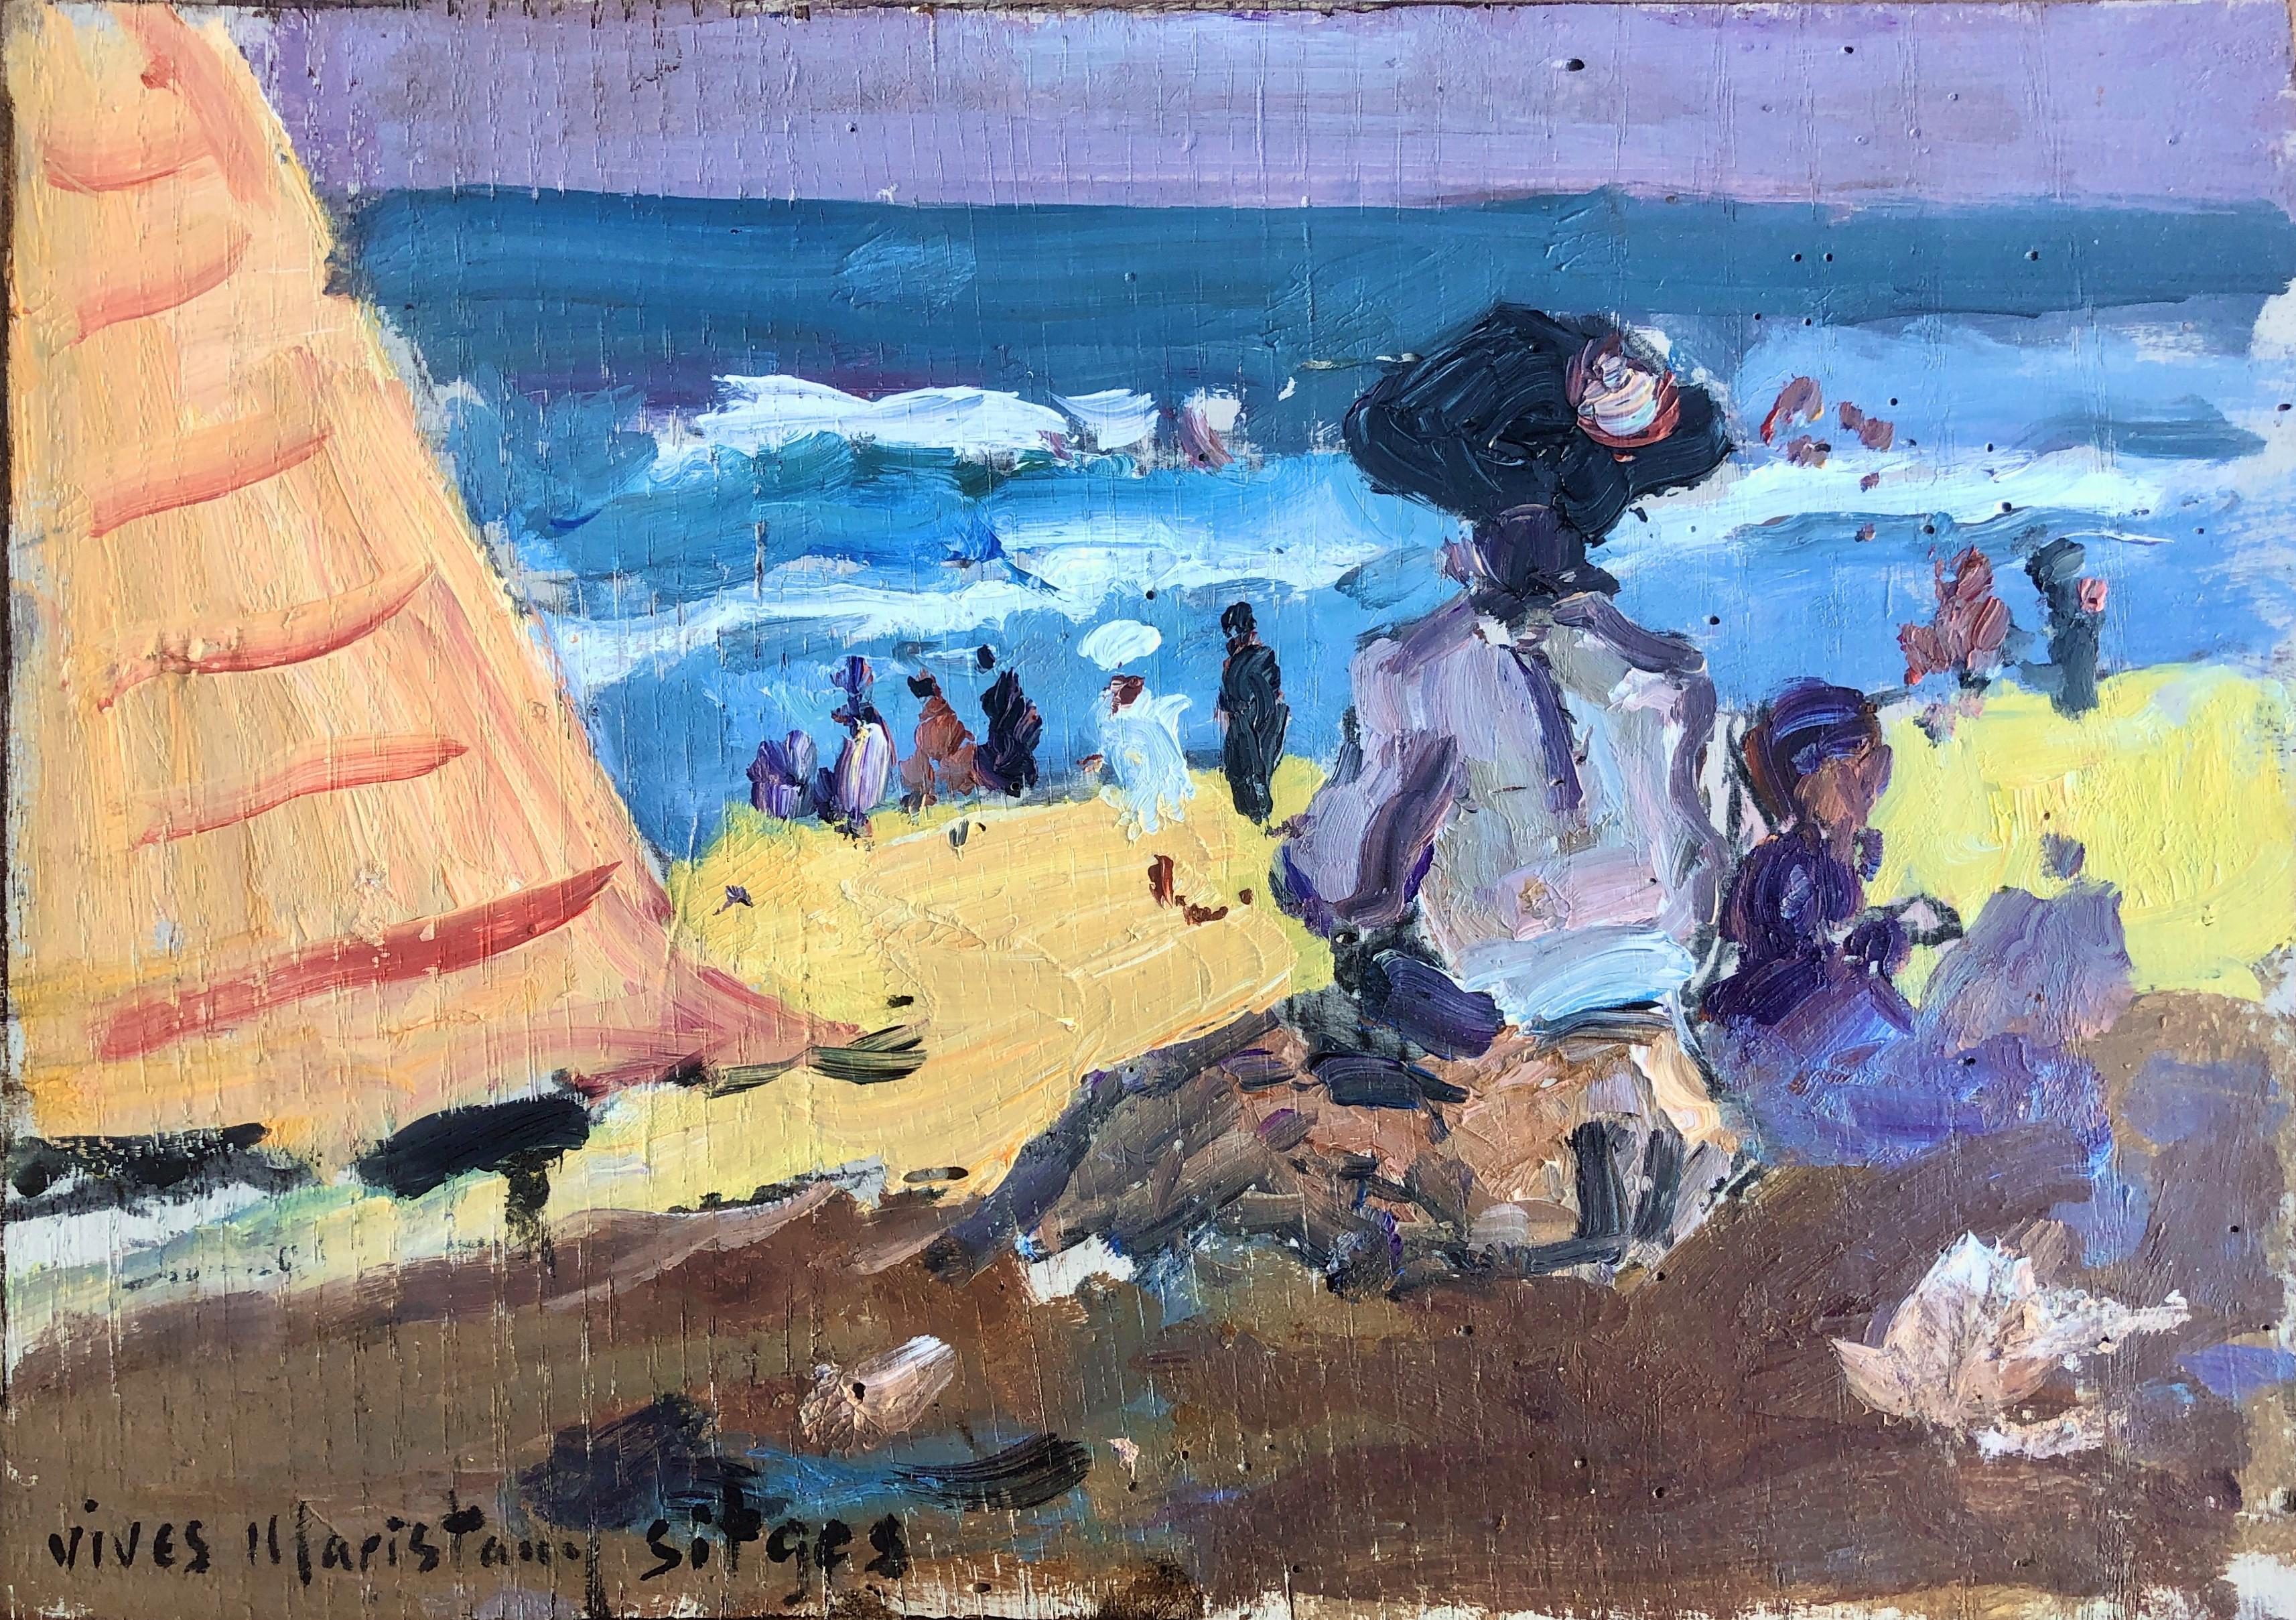 Joan Vives Maristany Portrait Painting - Sitges beach Barcelona Spain oil on board painting impressionist seascape